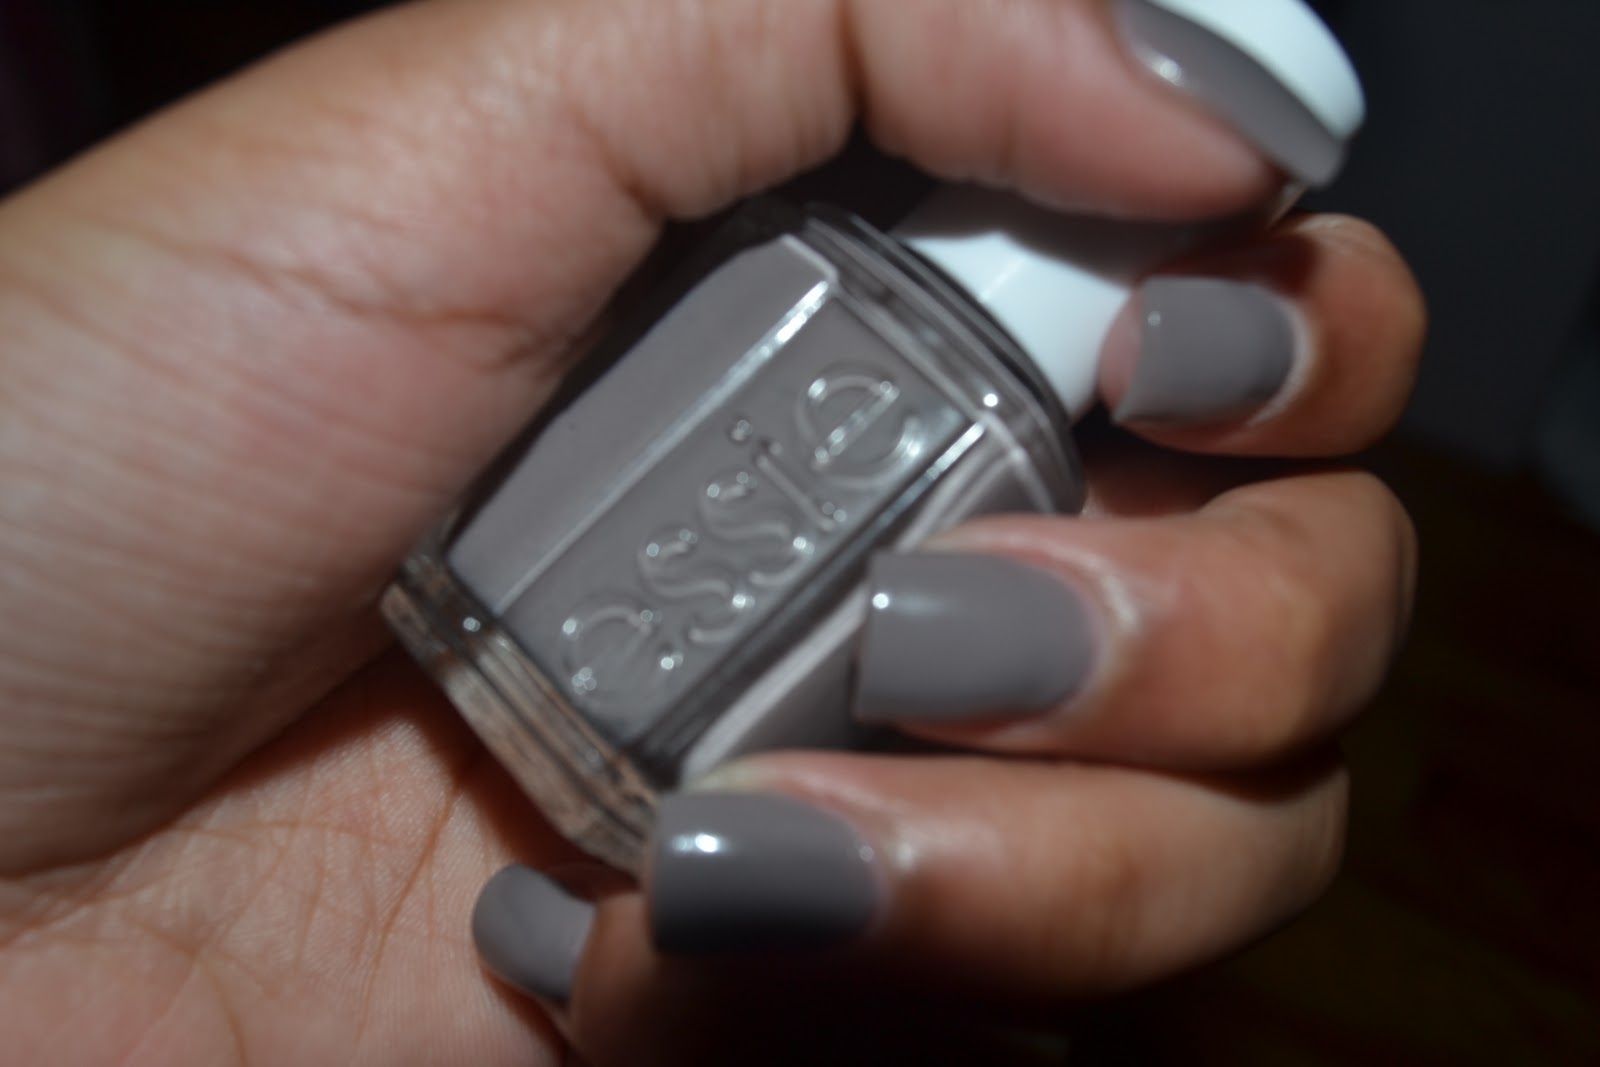 1. Essie Nail Polish in "Chinchilly" - wide 3